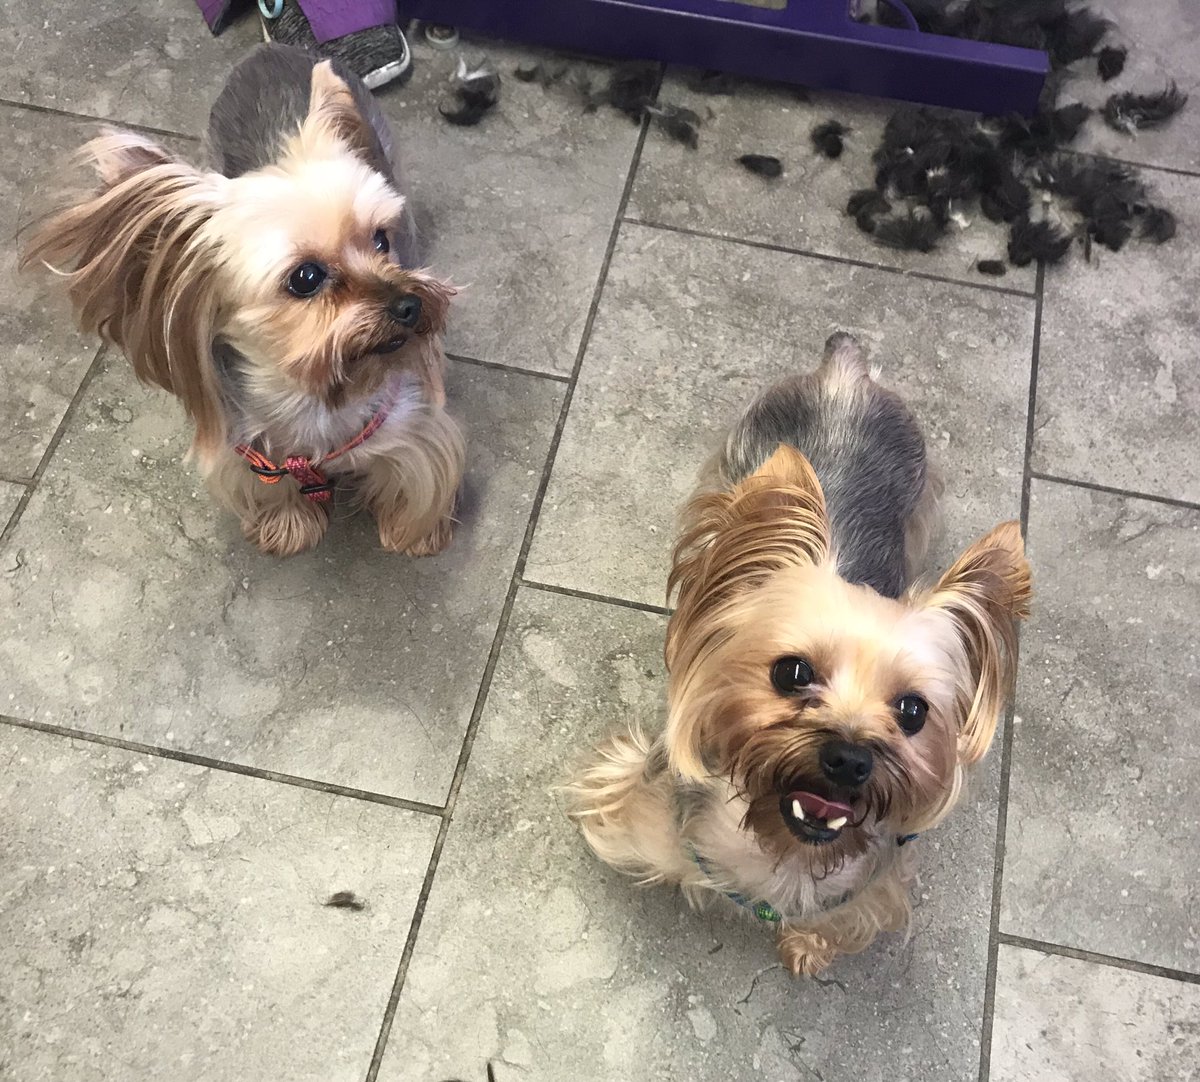 Two of our favorite clients Honeybee and Ladybug waiting for their puppy spa day!
.
.
.
#plumpuccigraham #plumpuccisalon #visitgrahamnc #shoplocal #shopsmall #dogs #dogsofinsta #dogsofinstagram #yorkiesofinstagram #yorkies #yorkiesofficial #yorkiesofig #groomersofinstagram